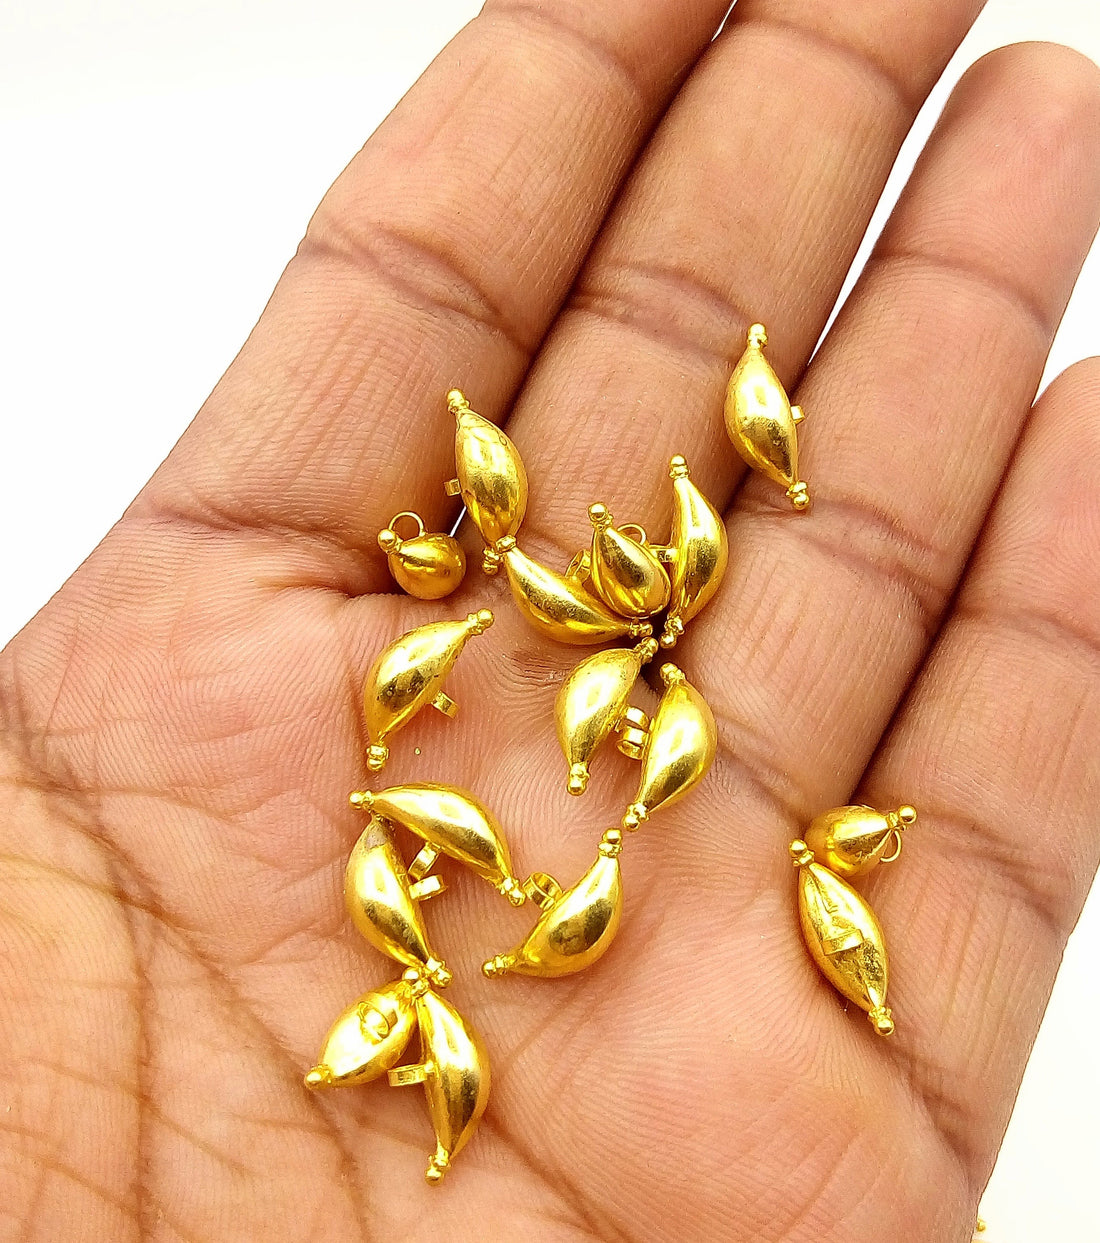 20 pieces Vintage antique handmade 18k yellow gold loose  small amulets pendant style Tribal jewelry from rajasthan india - TRIBAL ORNAMENTS